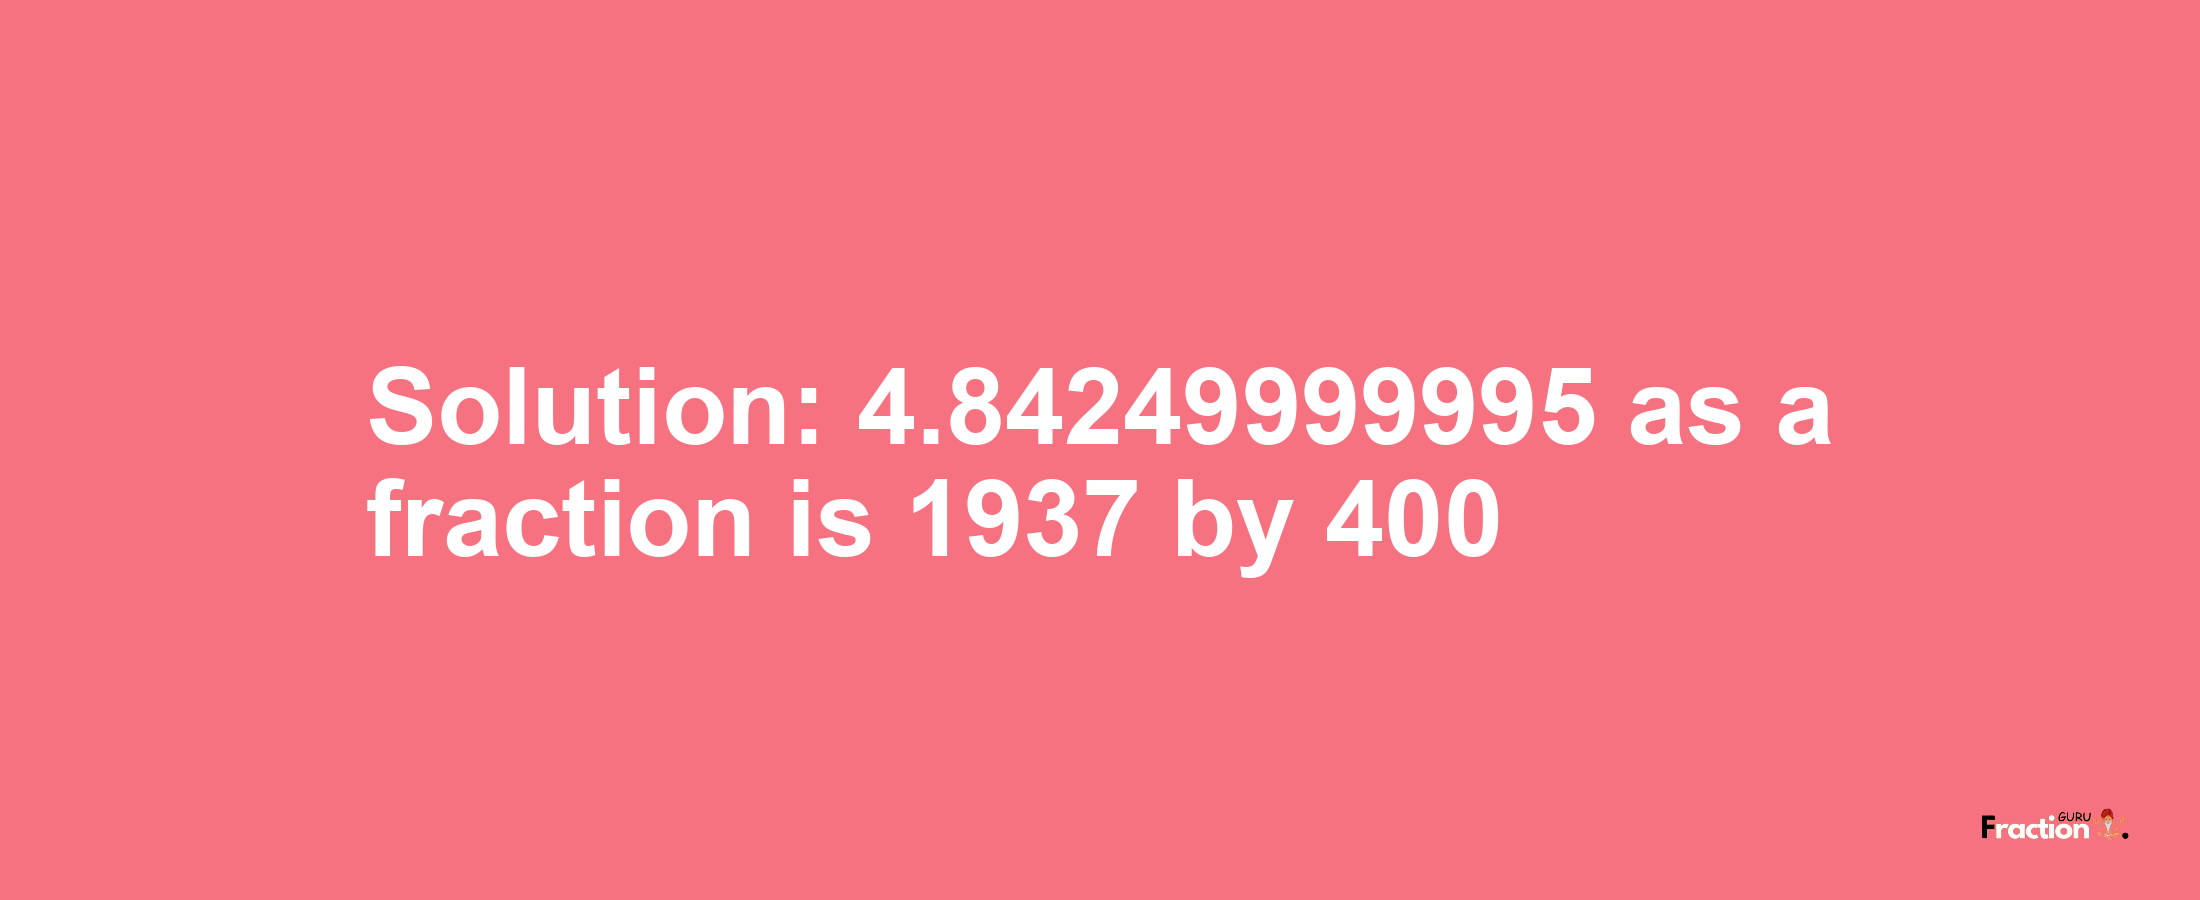 Solution:4.84249999995 as a fraction is 1937/400